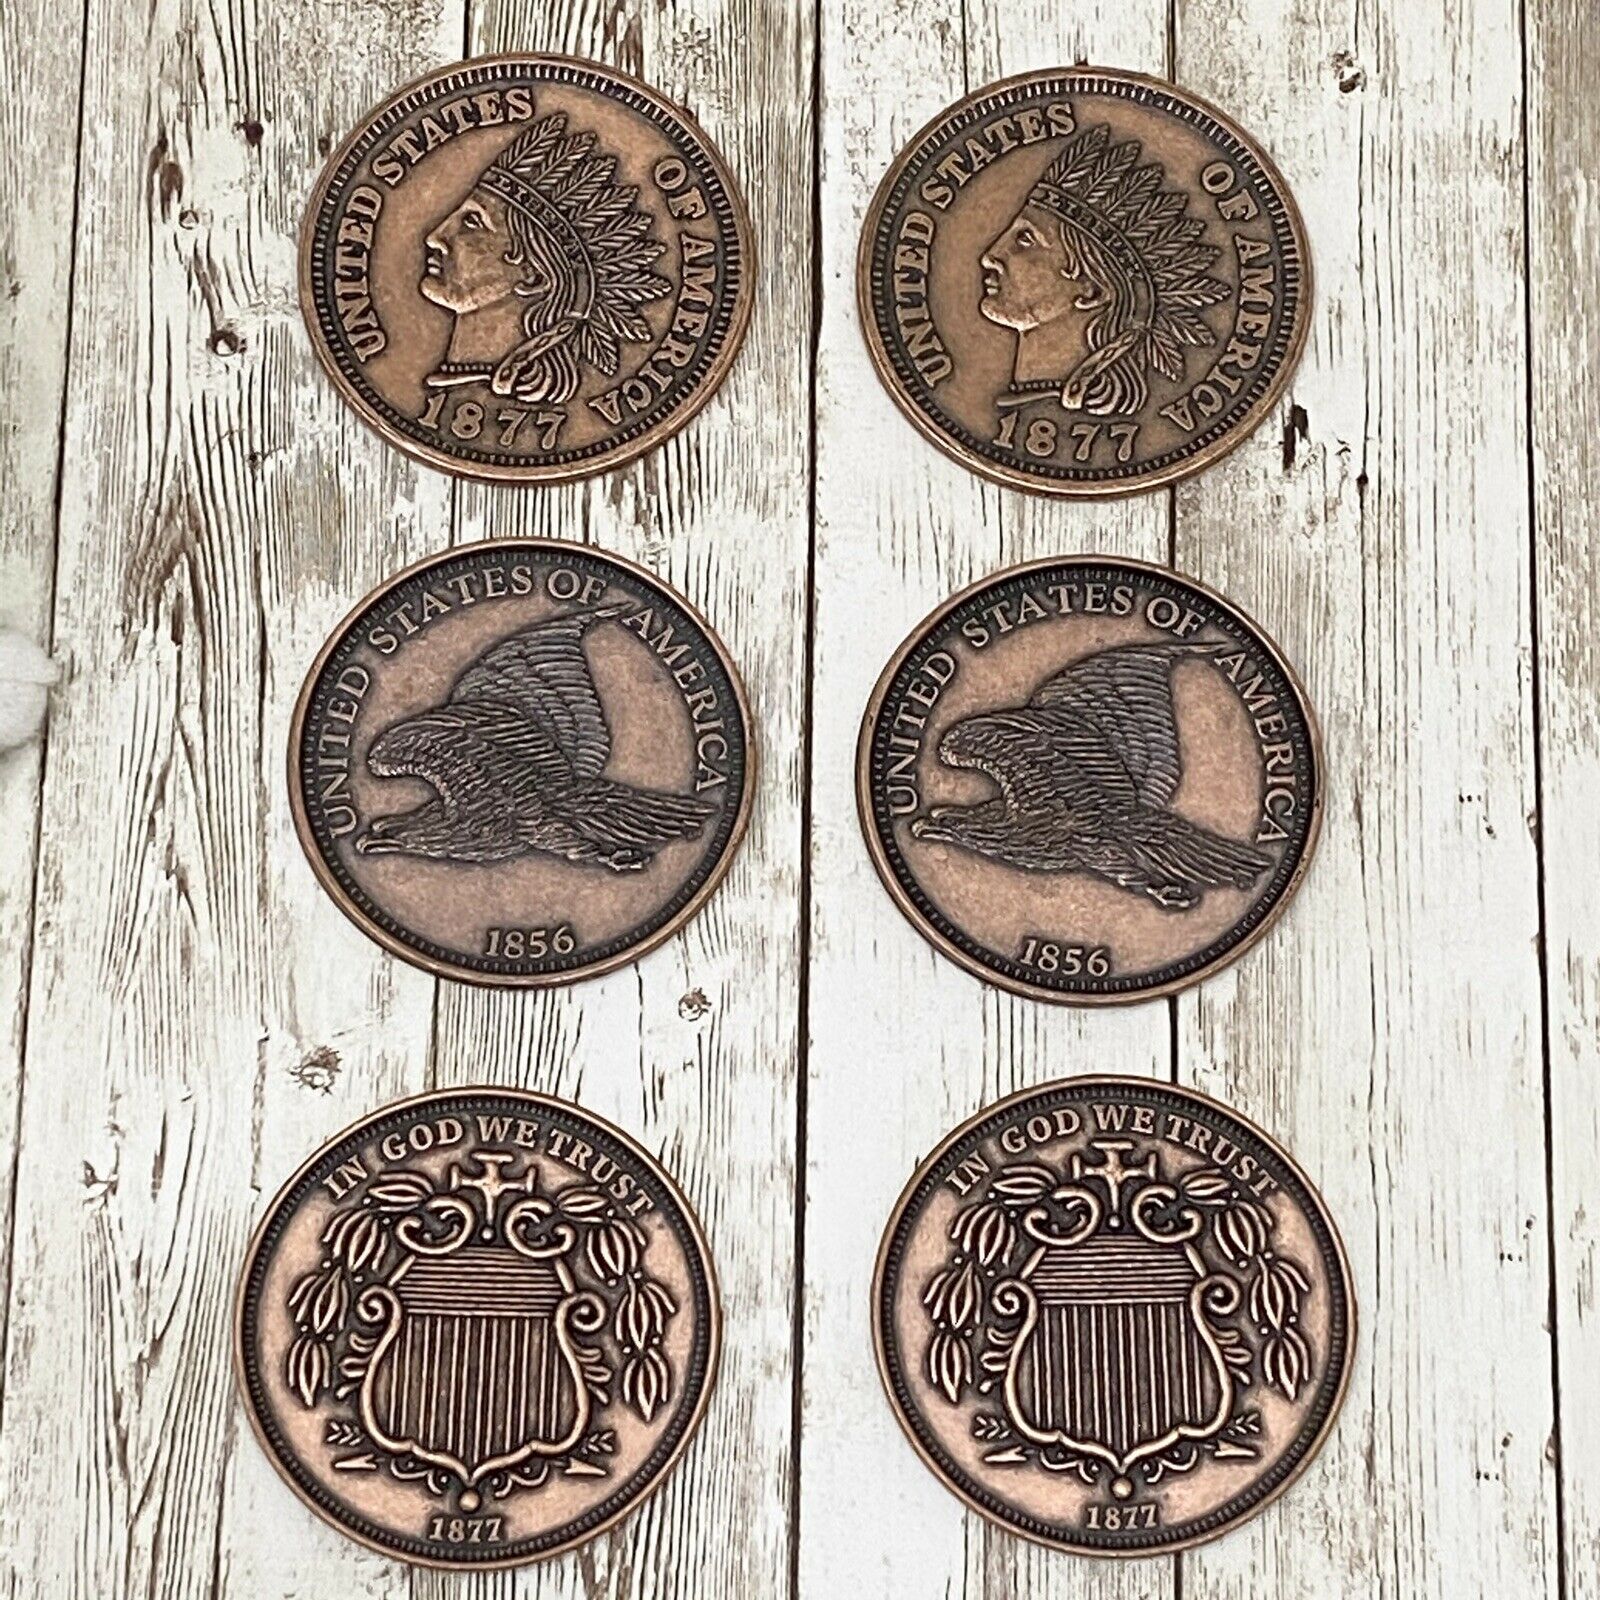 Vintage 3" Large Novelty Coins Paperweight Coaster Set Penny Nickel Eagle Indian